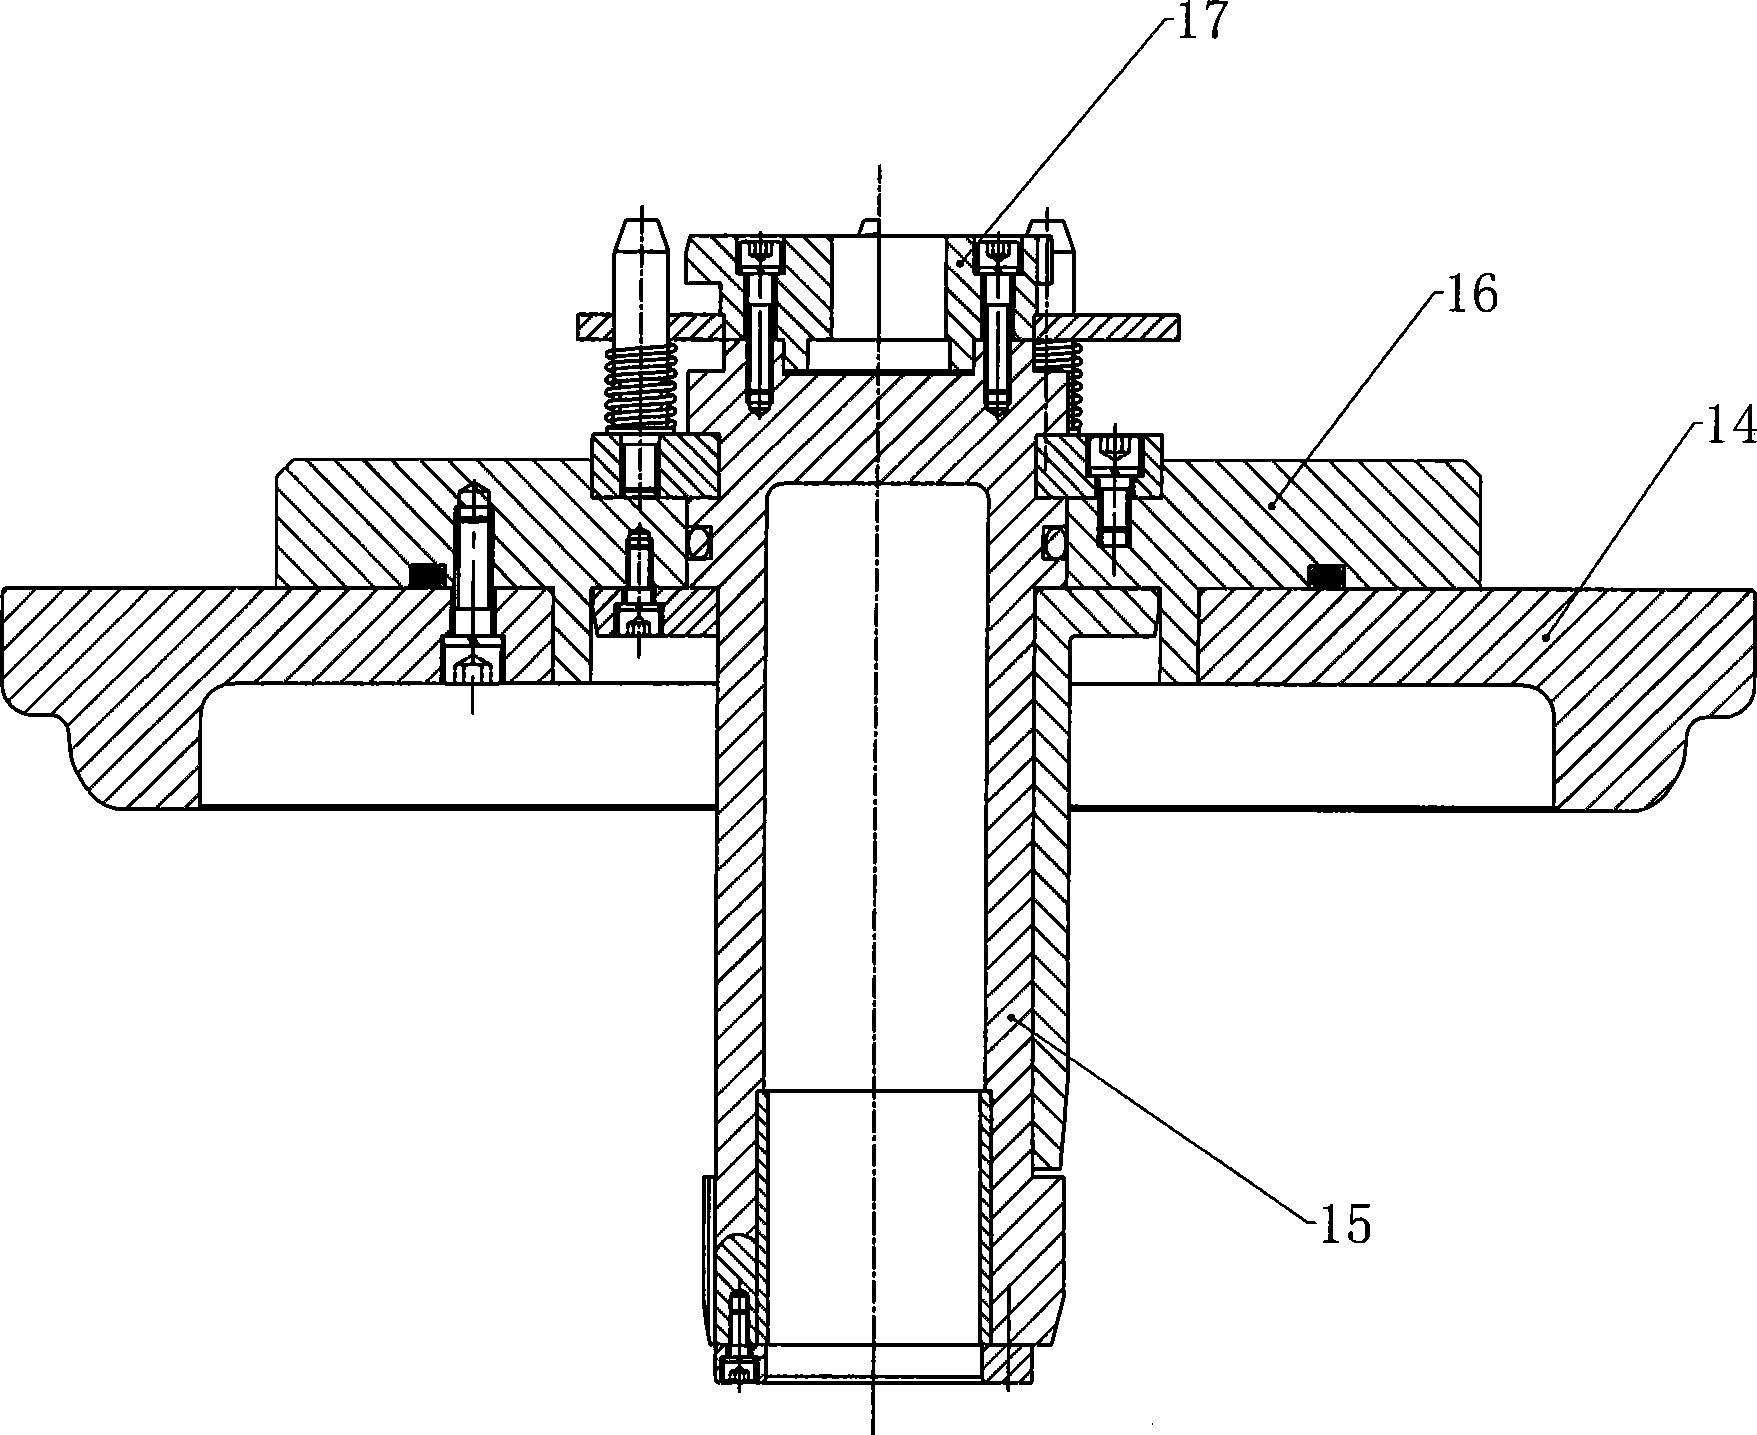 Two-position four-point scale-type rear inflation apparatus